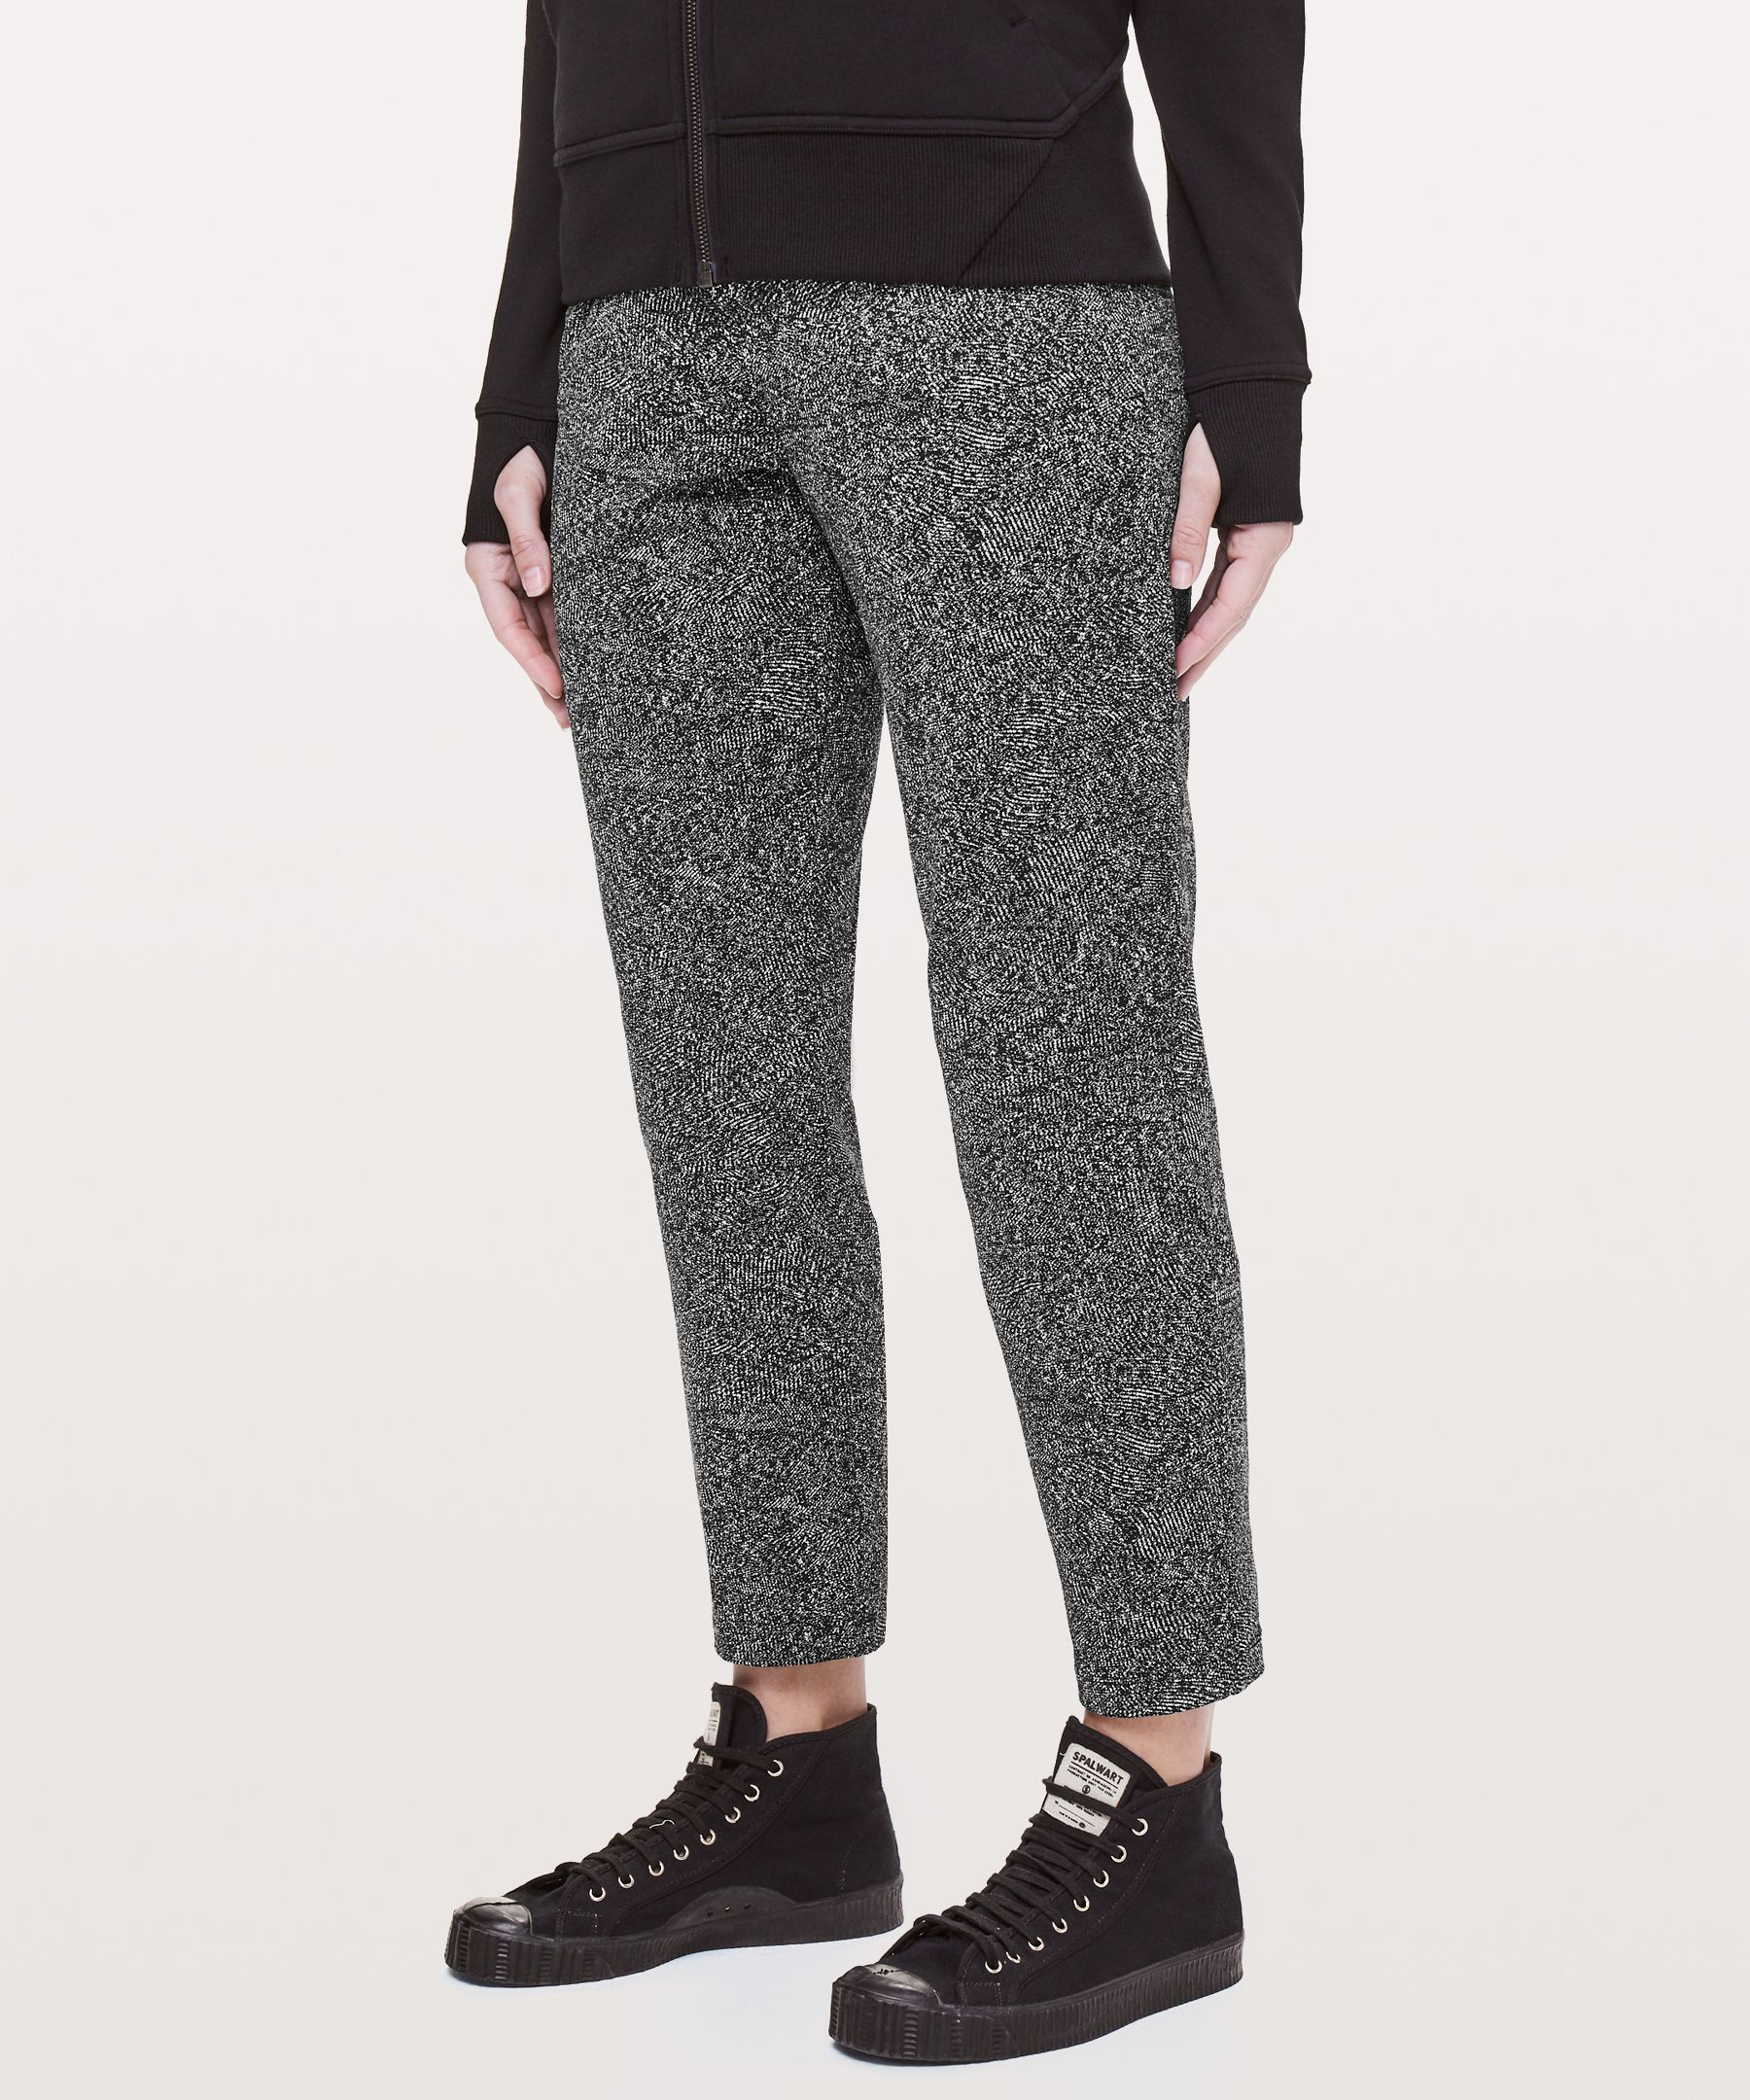 Lululemon On The Fly 7/8 Pant In Incognito Camo Multi Grey